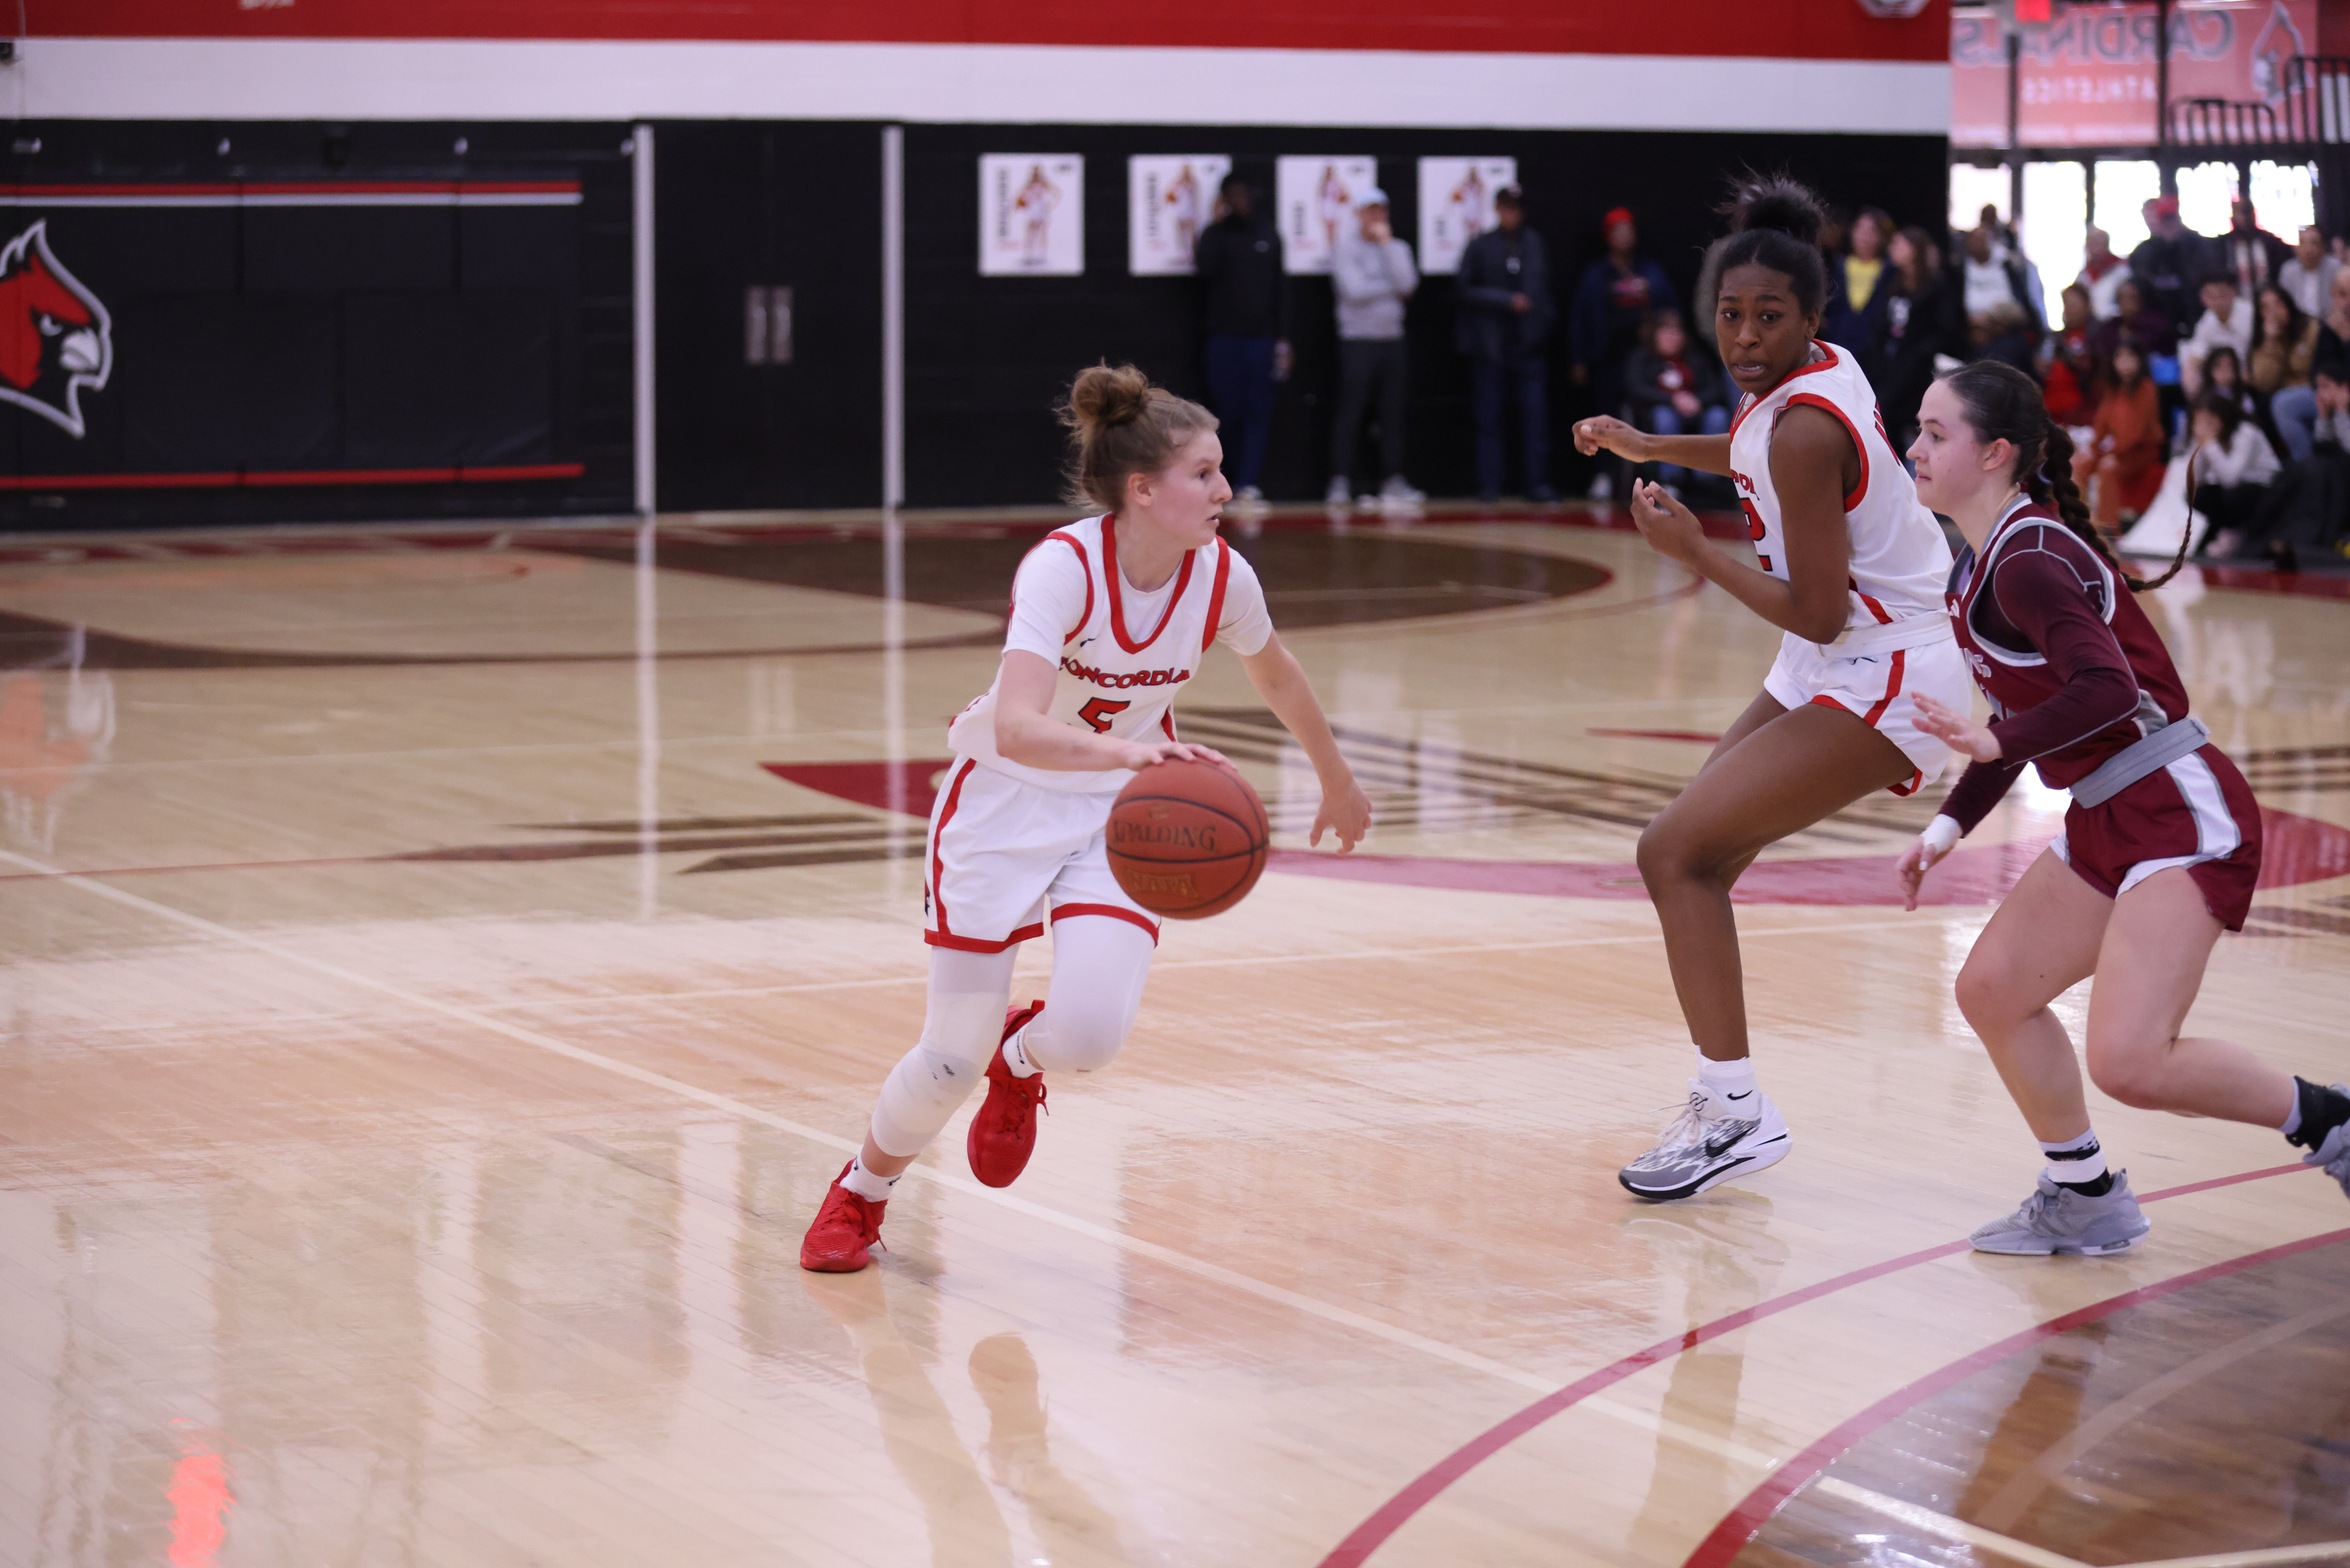 Women's Basketball rounds out regular season with OT win against Aquinas on Senior Day